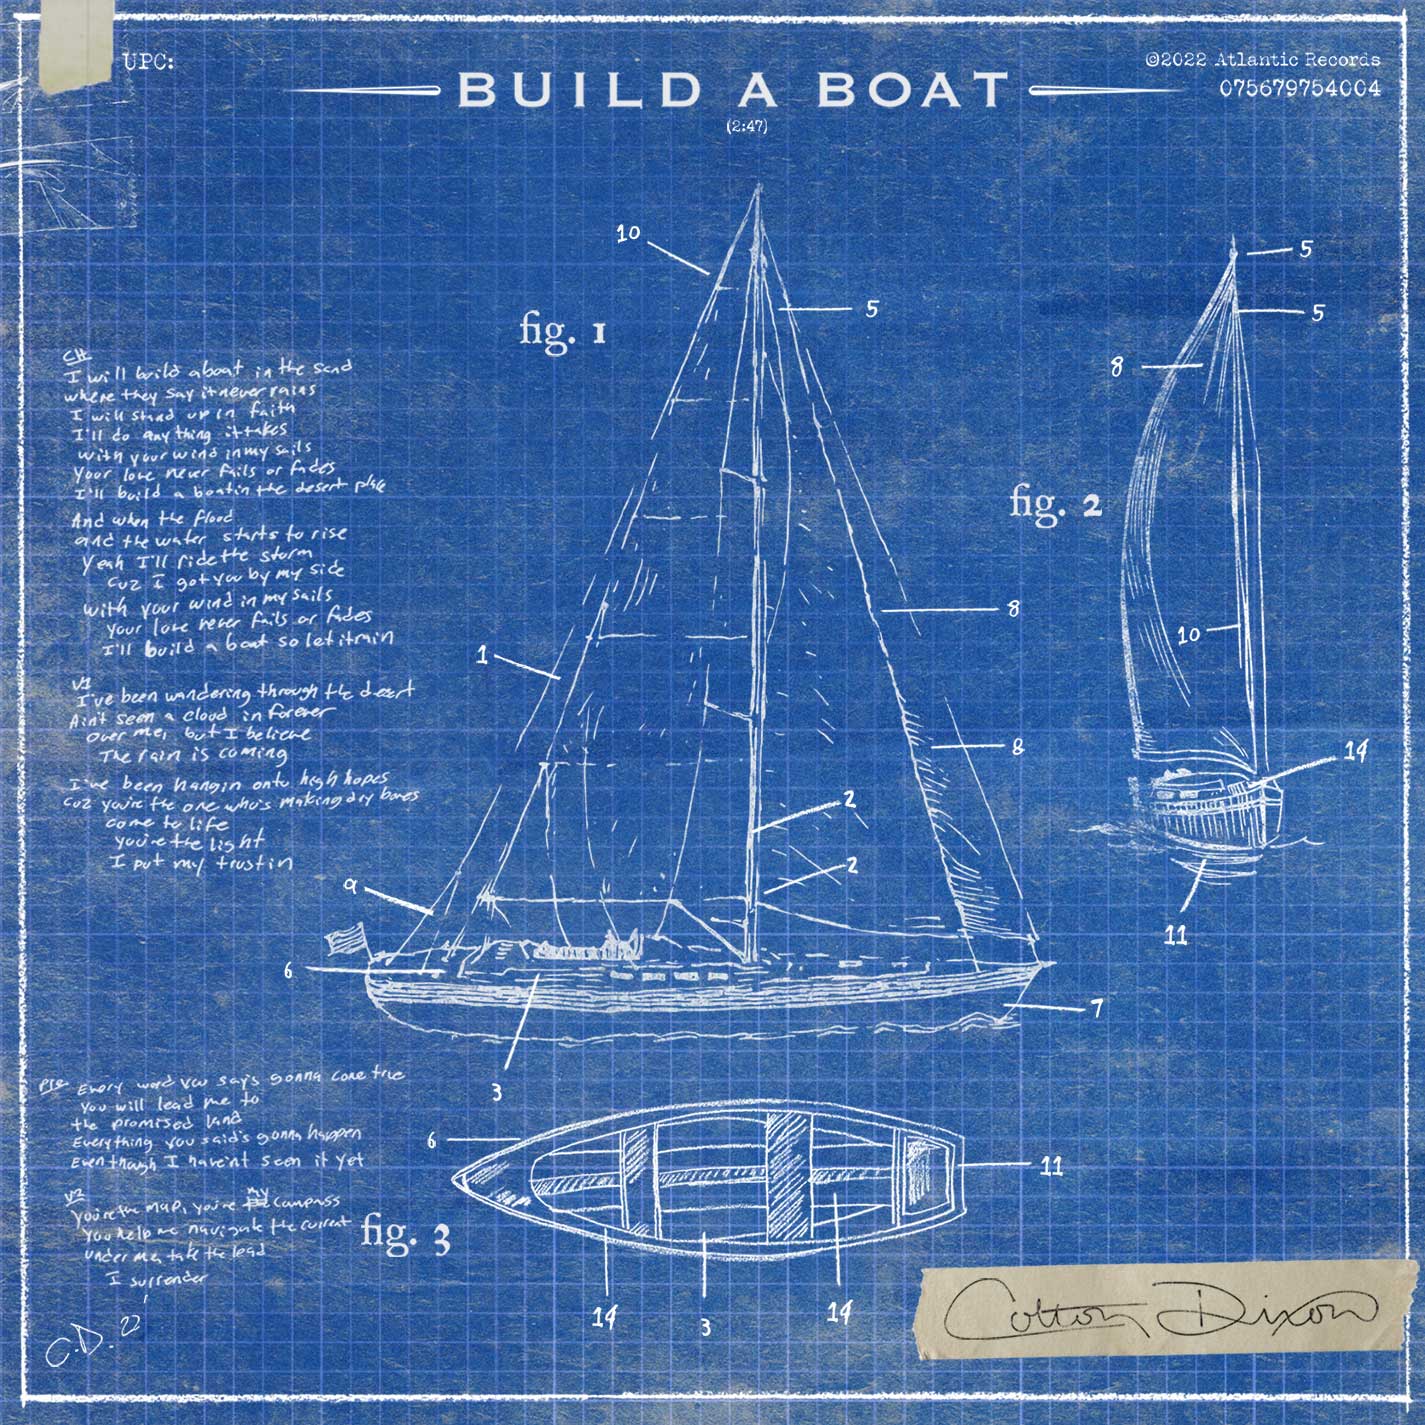 Build a Boat (with Mercy Ships)